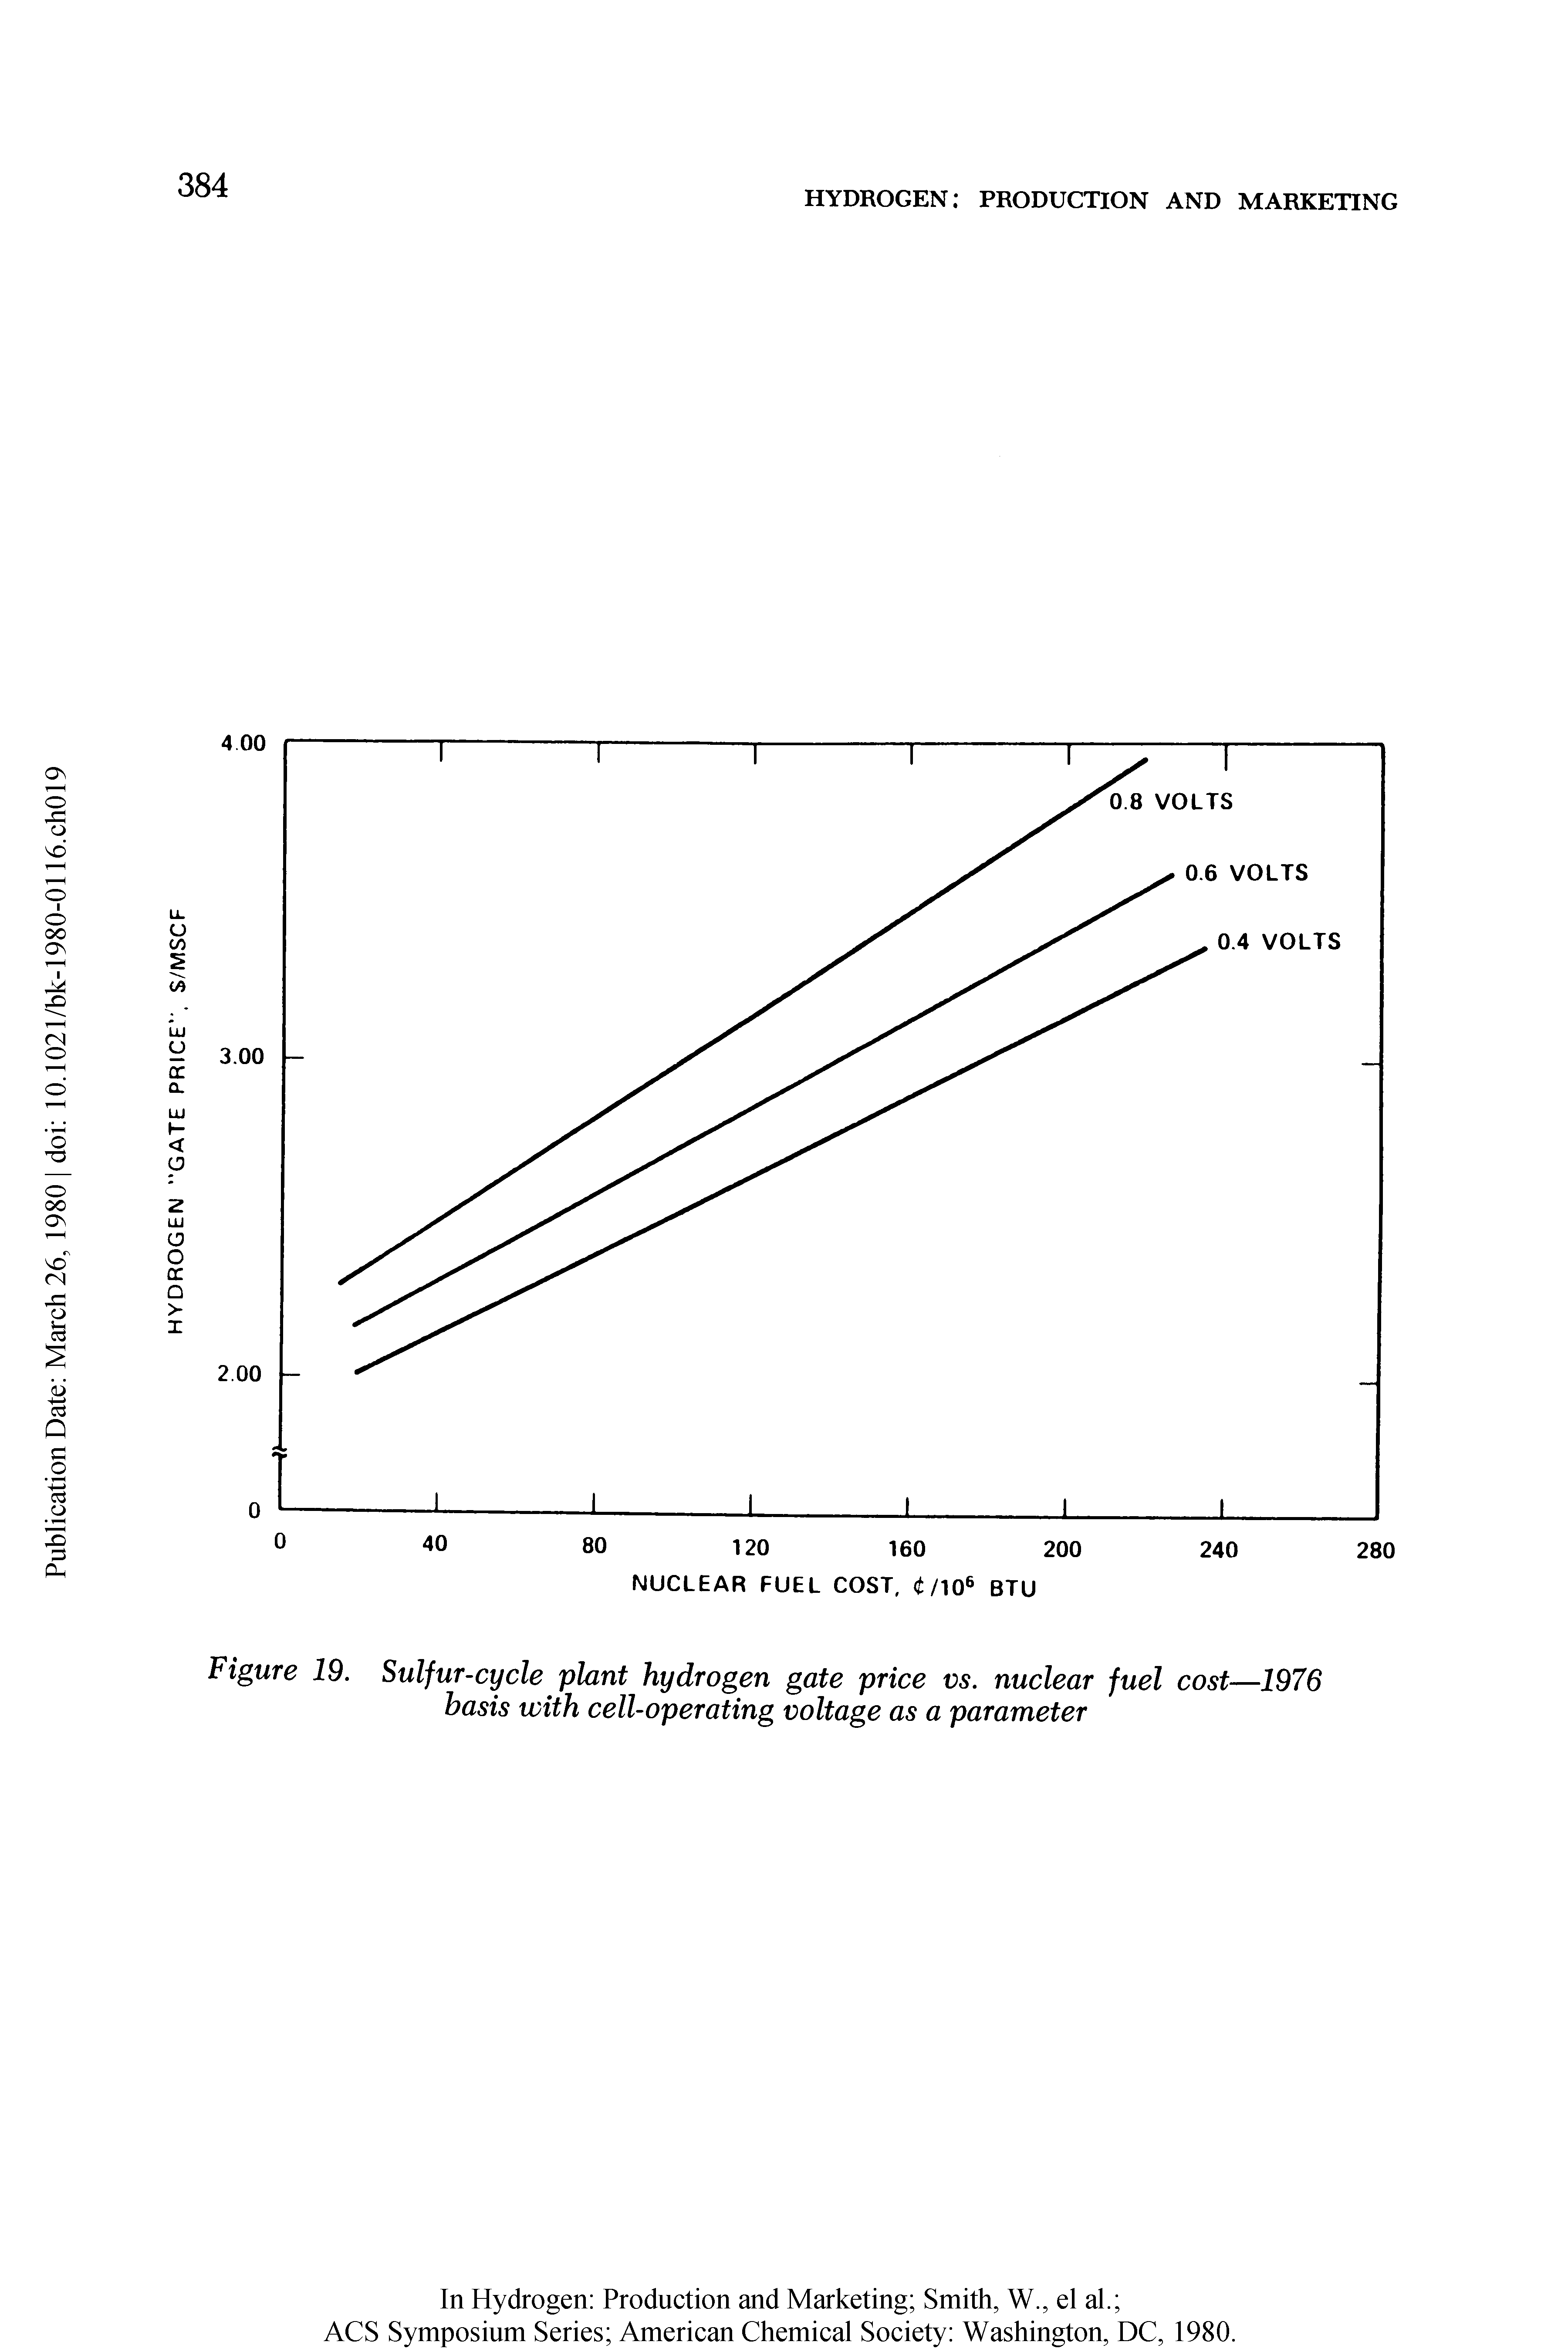 Figure 19. Sulfur-cycle plant hydrogen gate price vs. nuclear fuel cost—1976 basis with cell-operating voltage as a parameter...